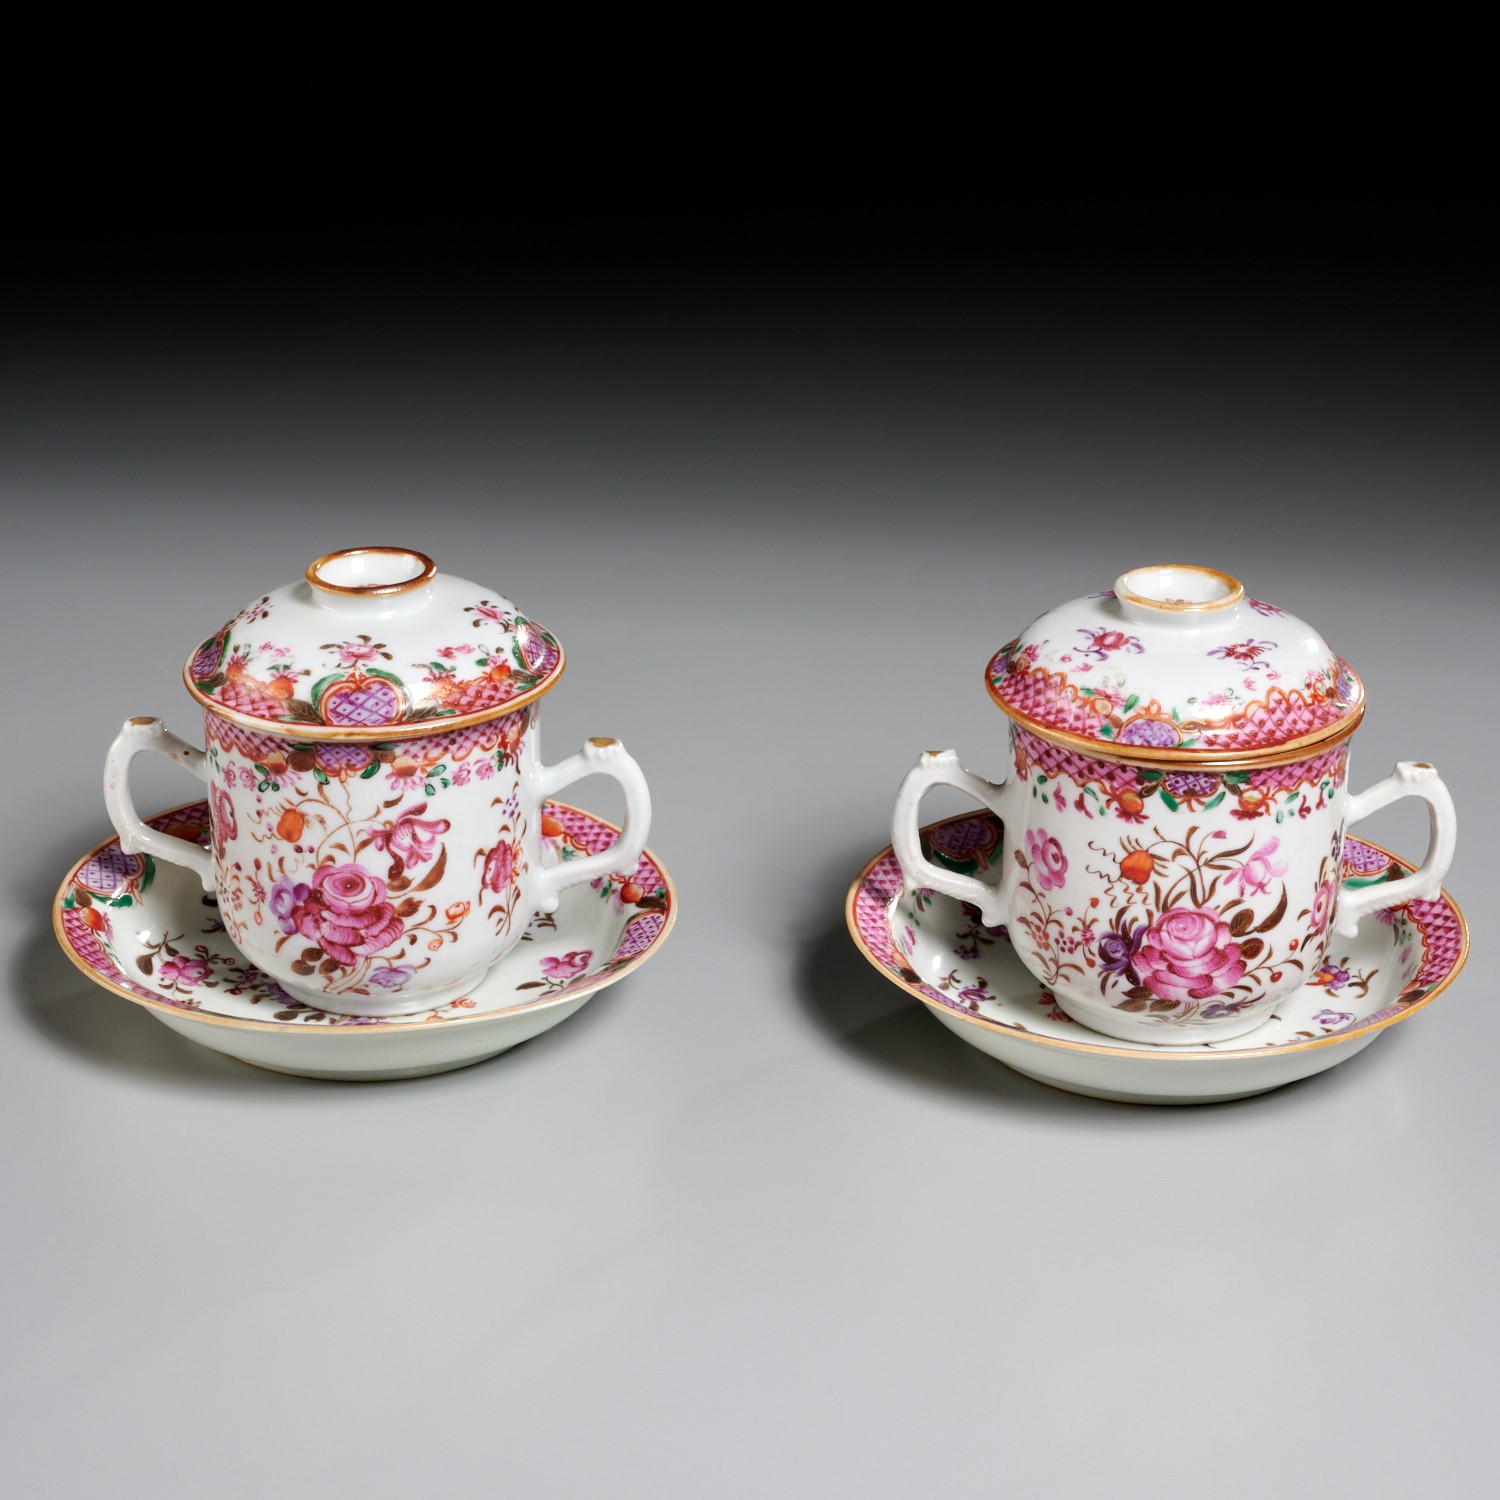 PAIR CHINESE EXPORT LIDDED CUPS 2a5d49